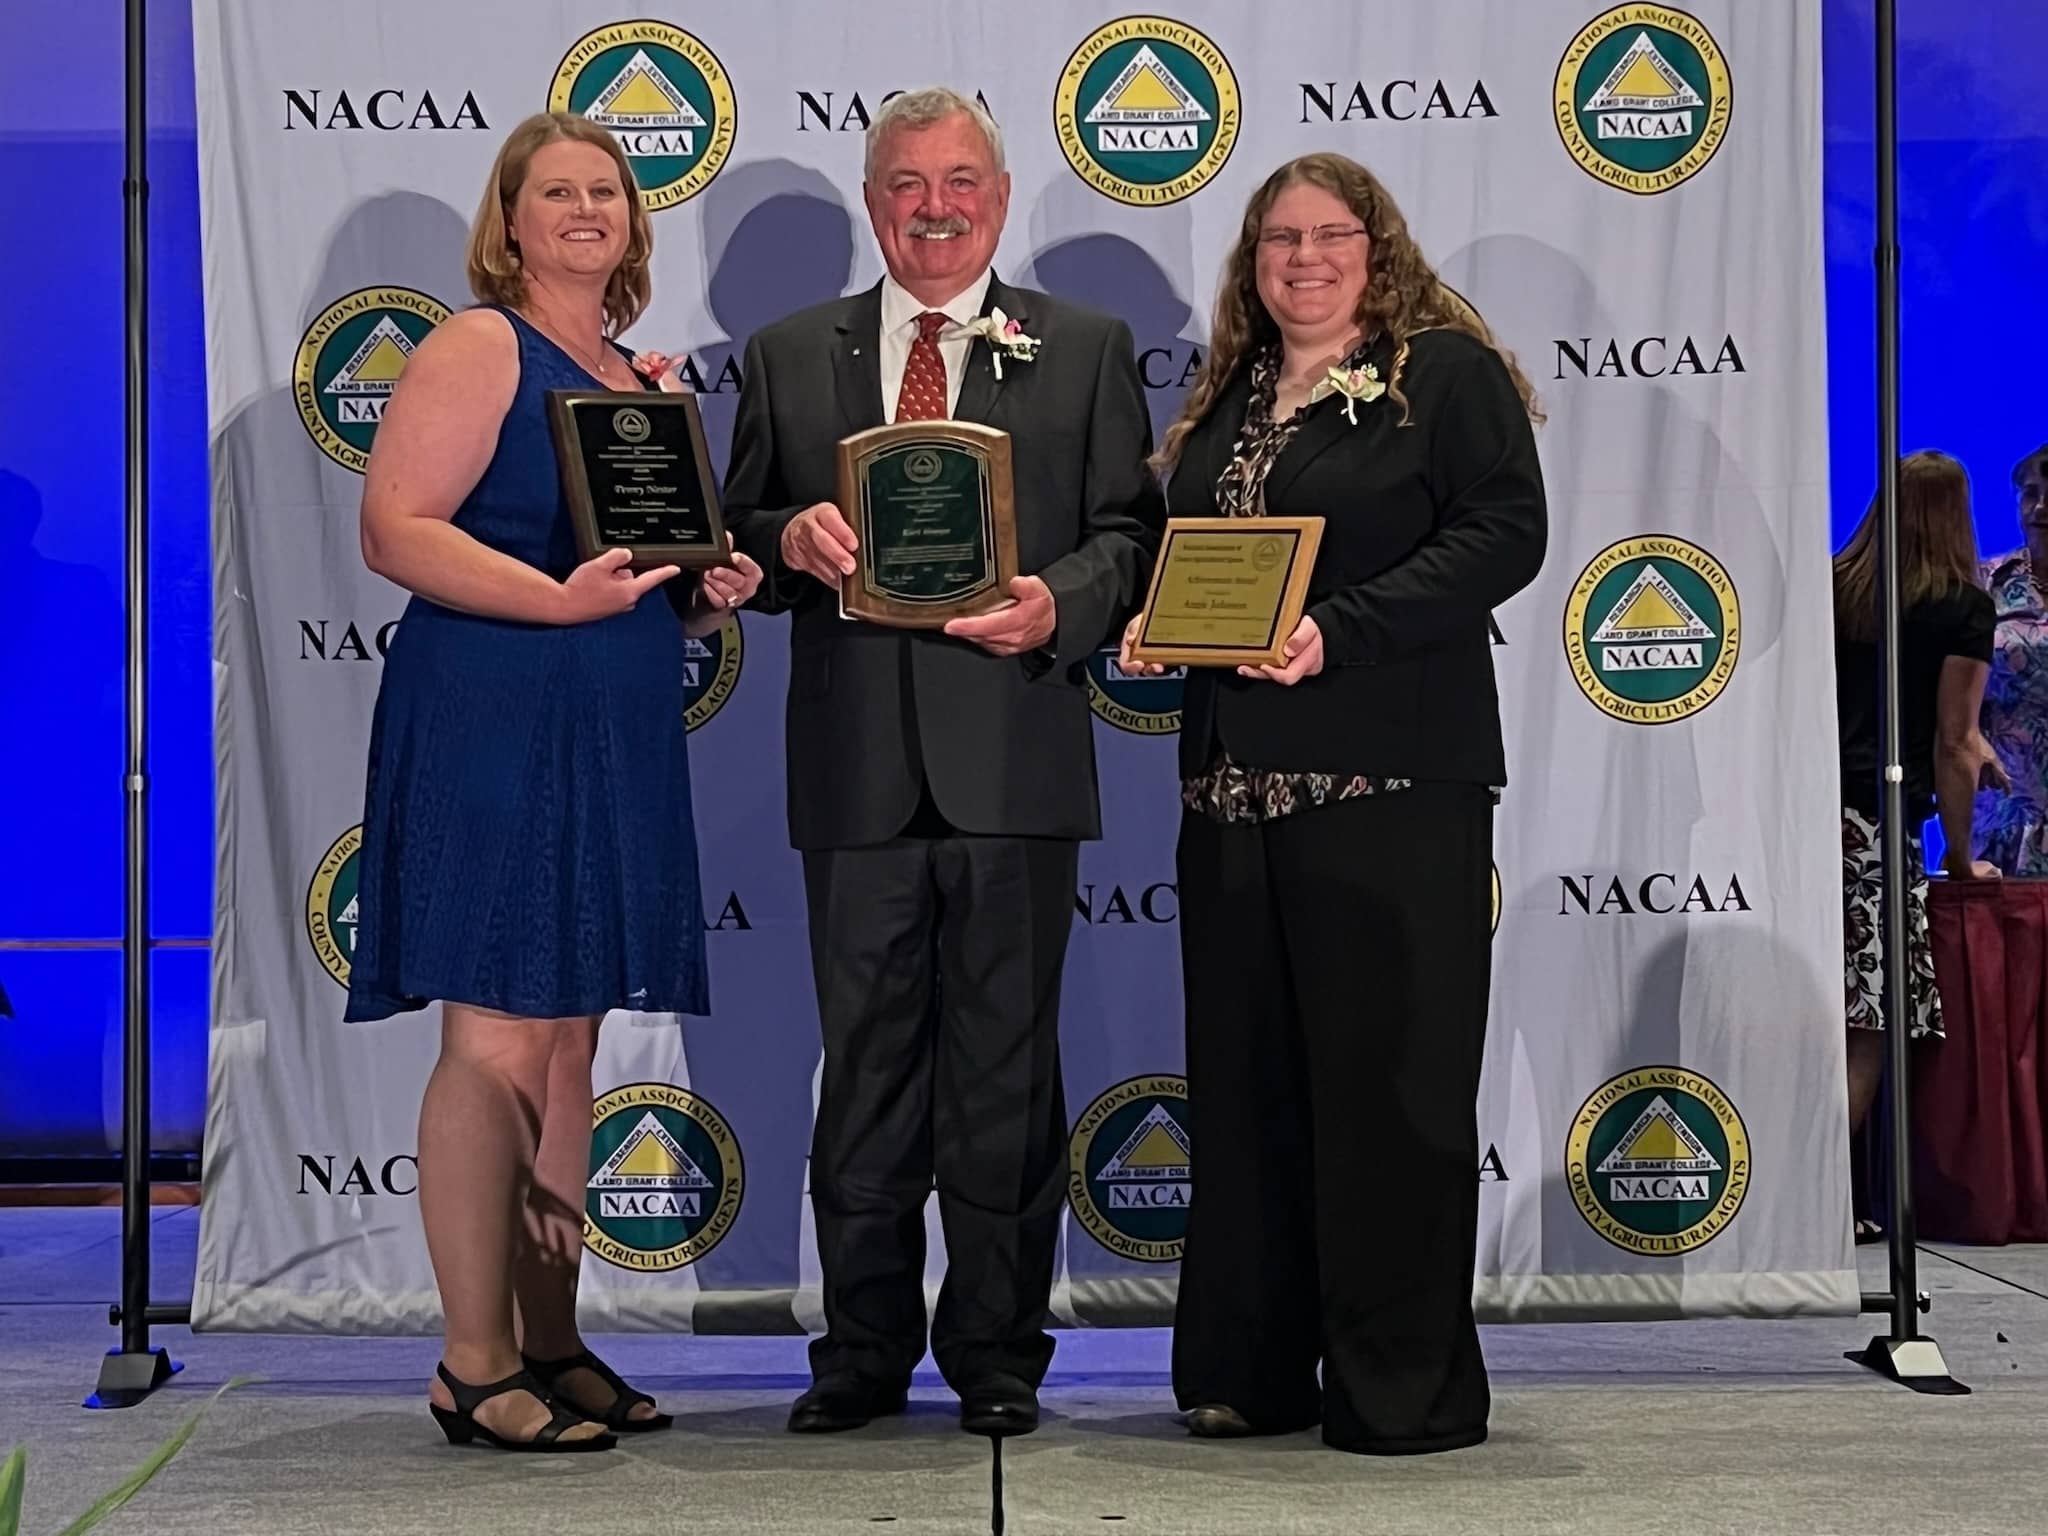 penny-nester-karl-hoppe-and-angie-johnson-were-honored-for-their-extension-work-and-service-at-the-national-association-of-county-agricultural-agents-conference-ndsu-photo